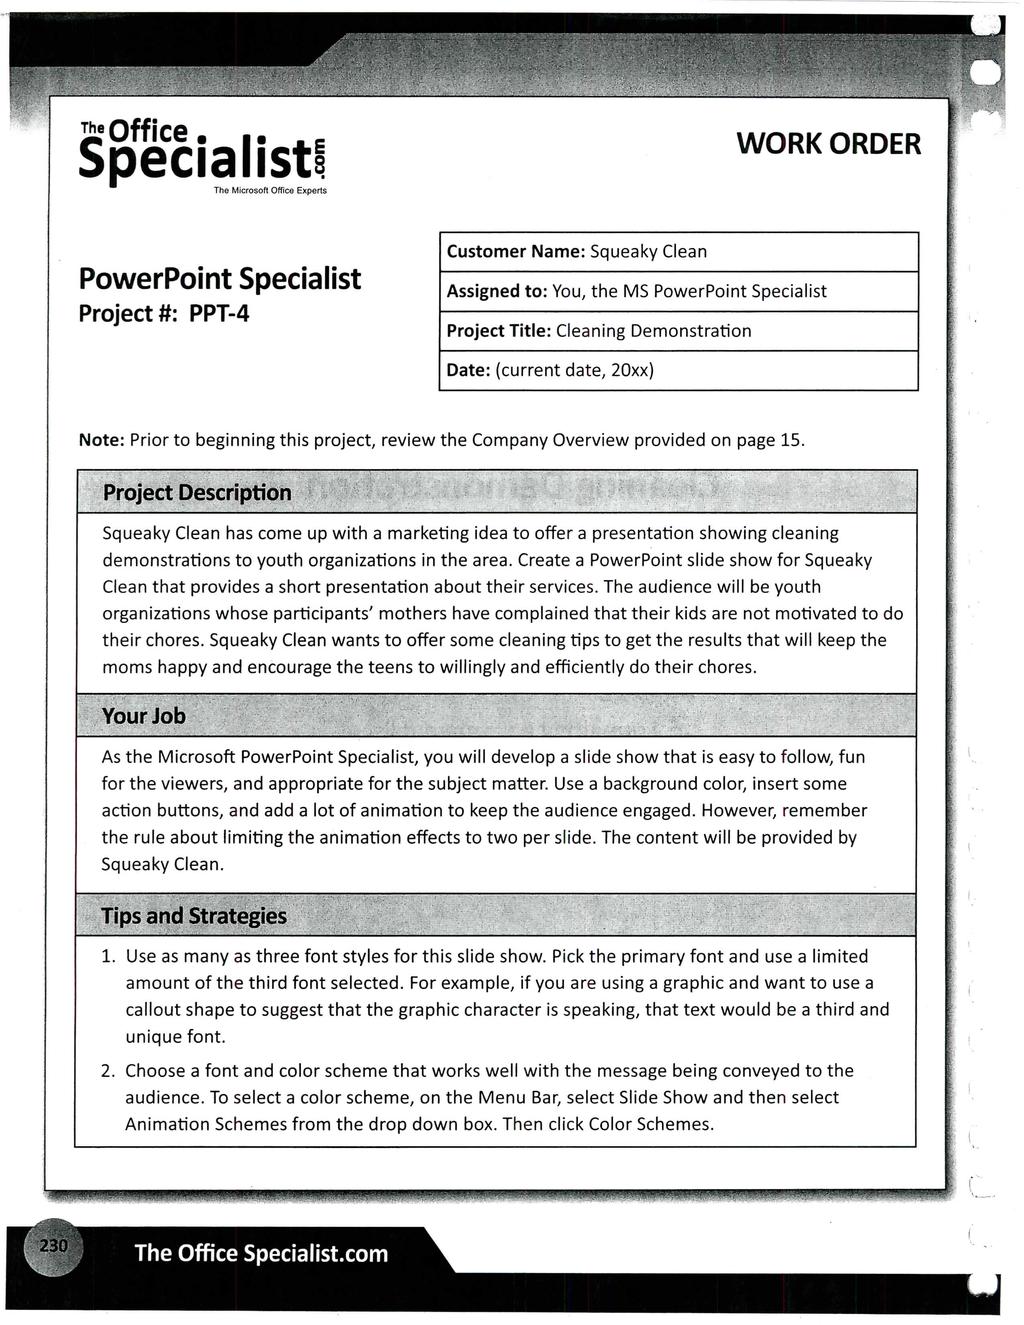 TheOffic6 Specialist3 The Microsoft Office Experts WORK ORDER PowerPoint Specialist Project #: PPT-4 Customer Name: Squeaky Clean Assigned to: You, the MS PowerPoint Specialist Project Title: